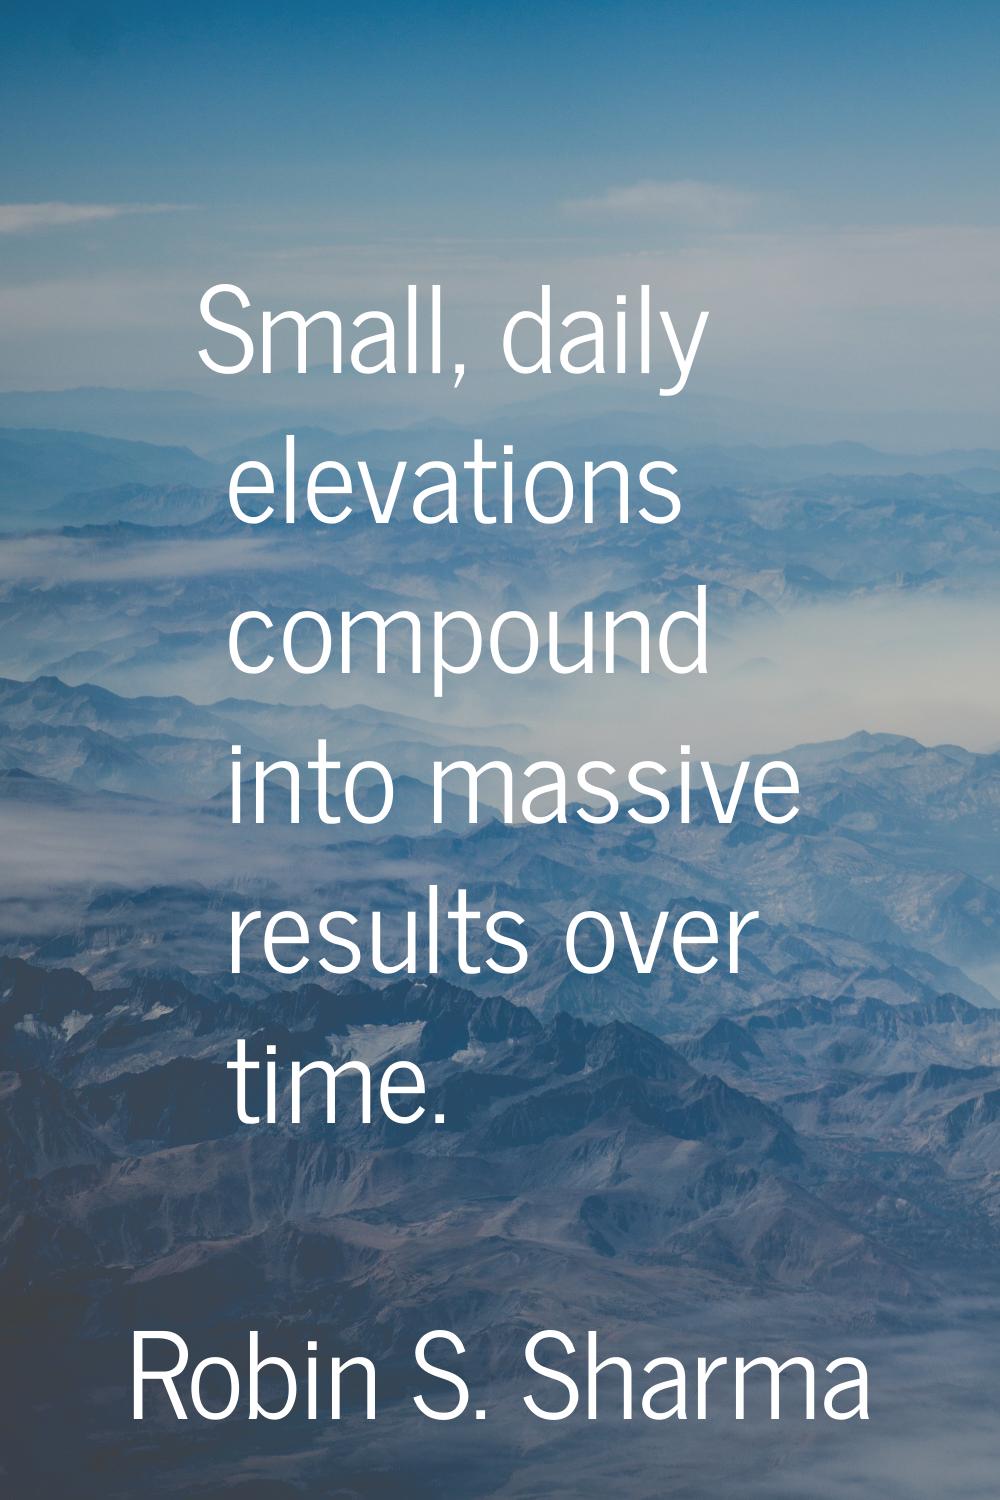 Small, daily elevations compound into massive results over time.